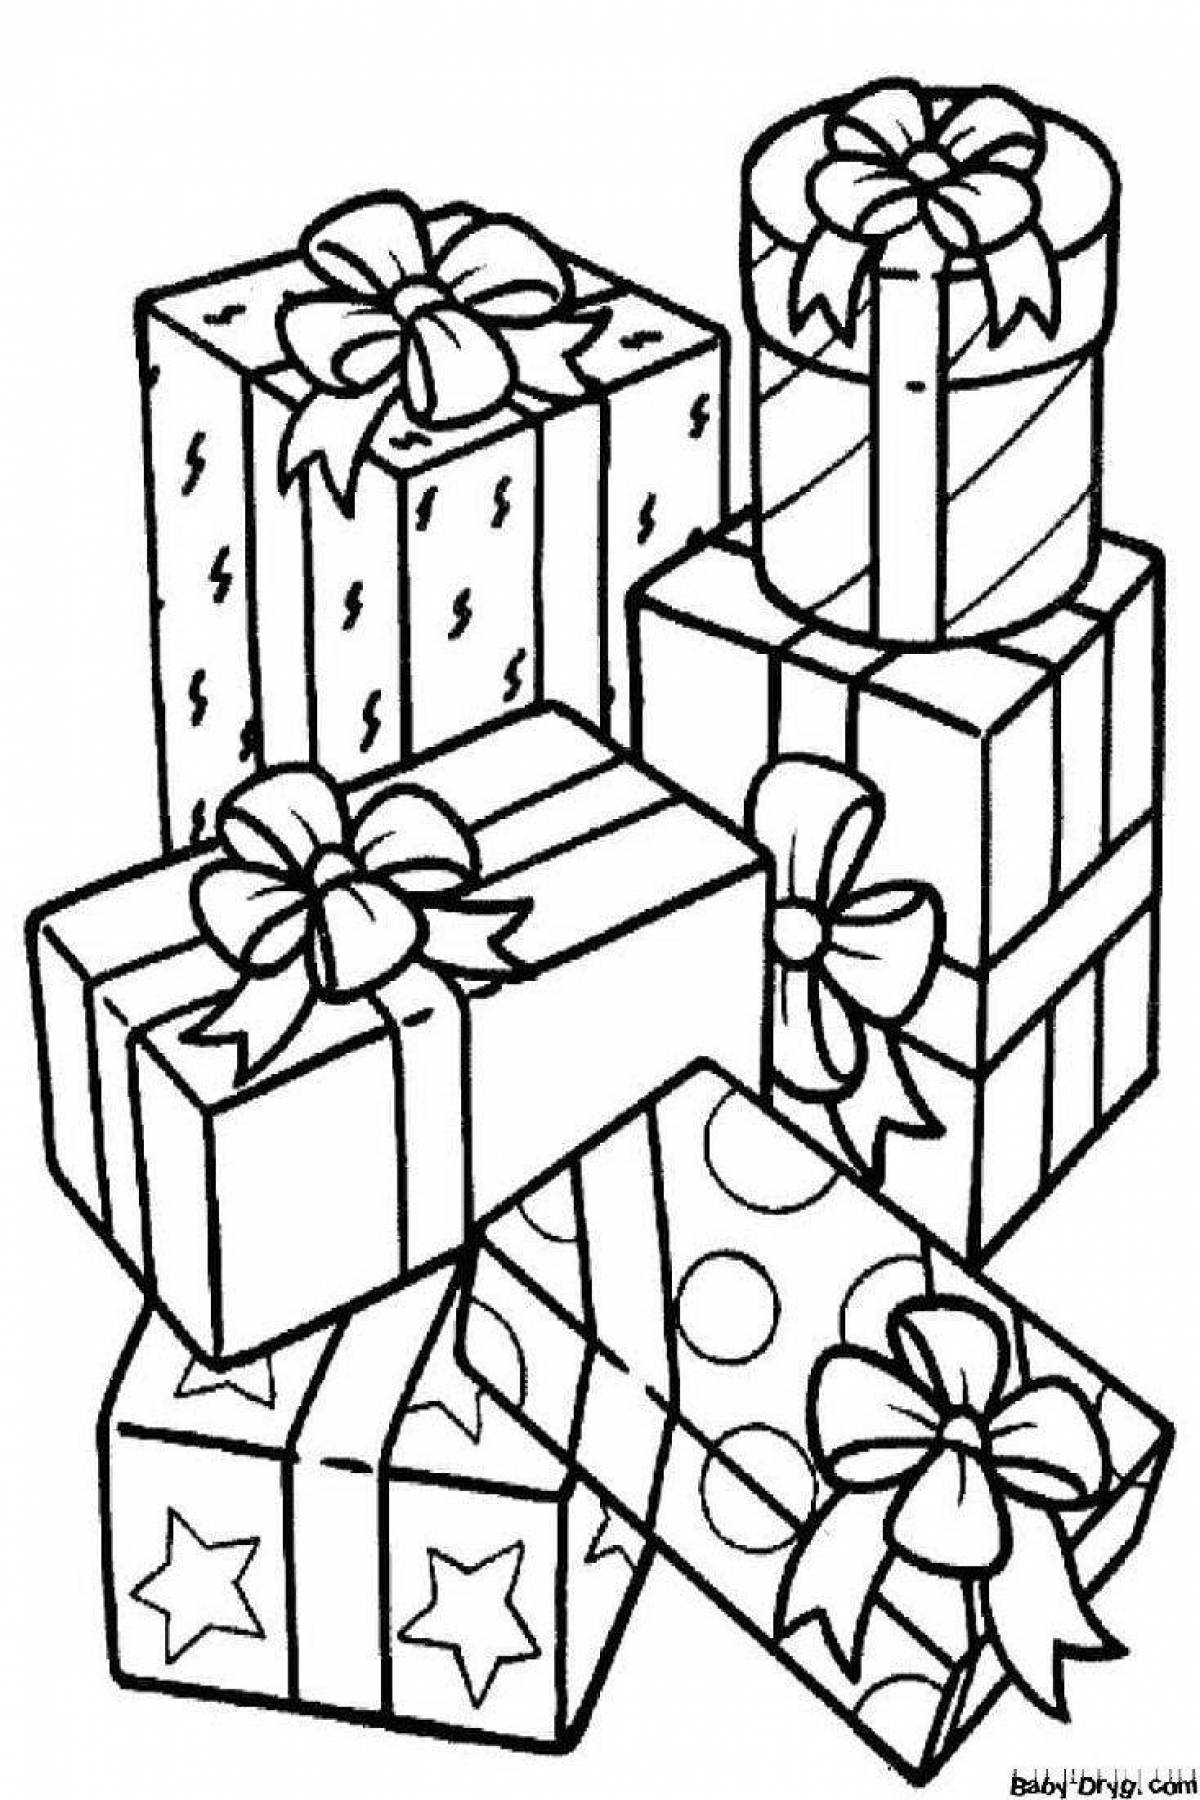 Exciting birthday gift coloring page